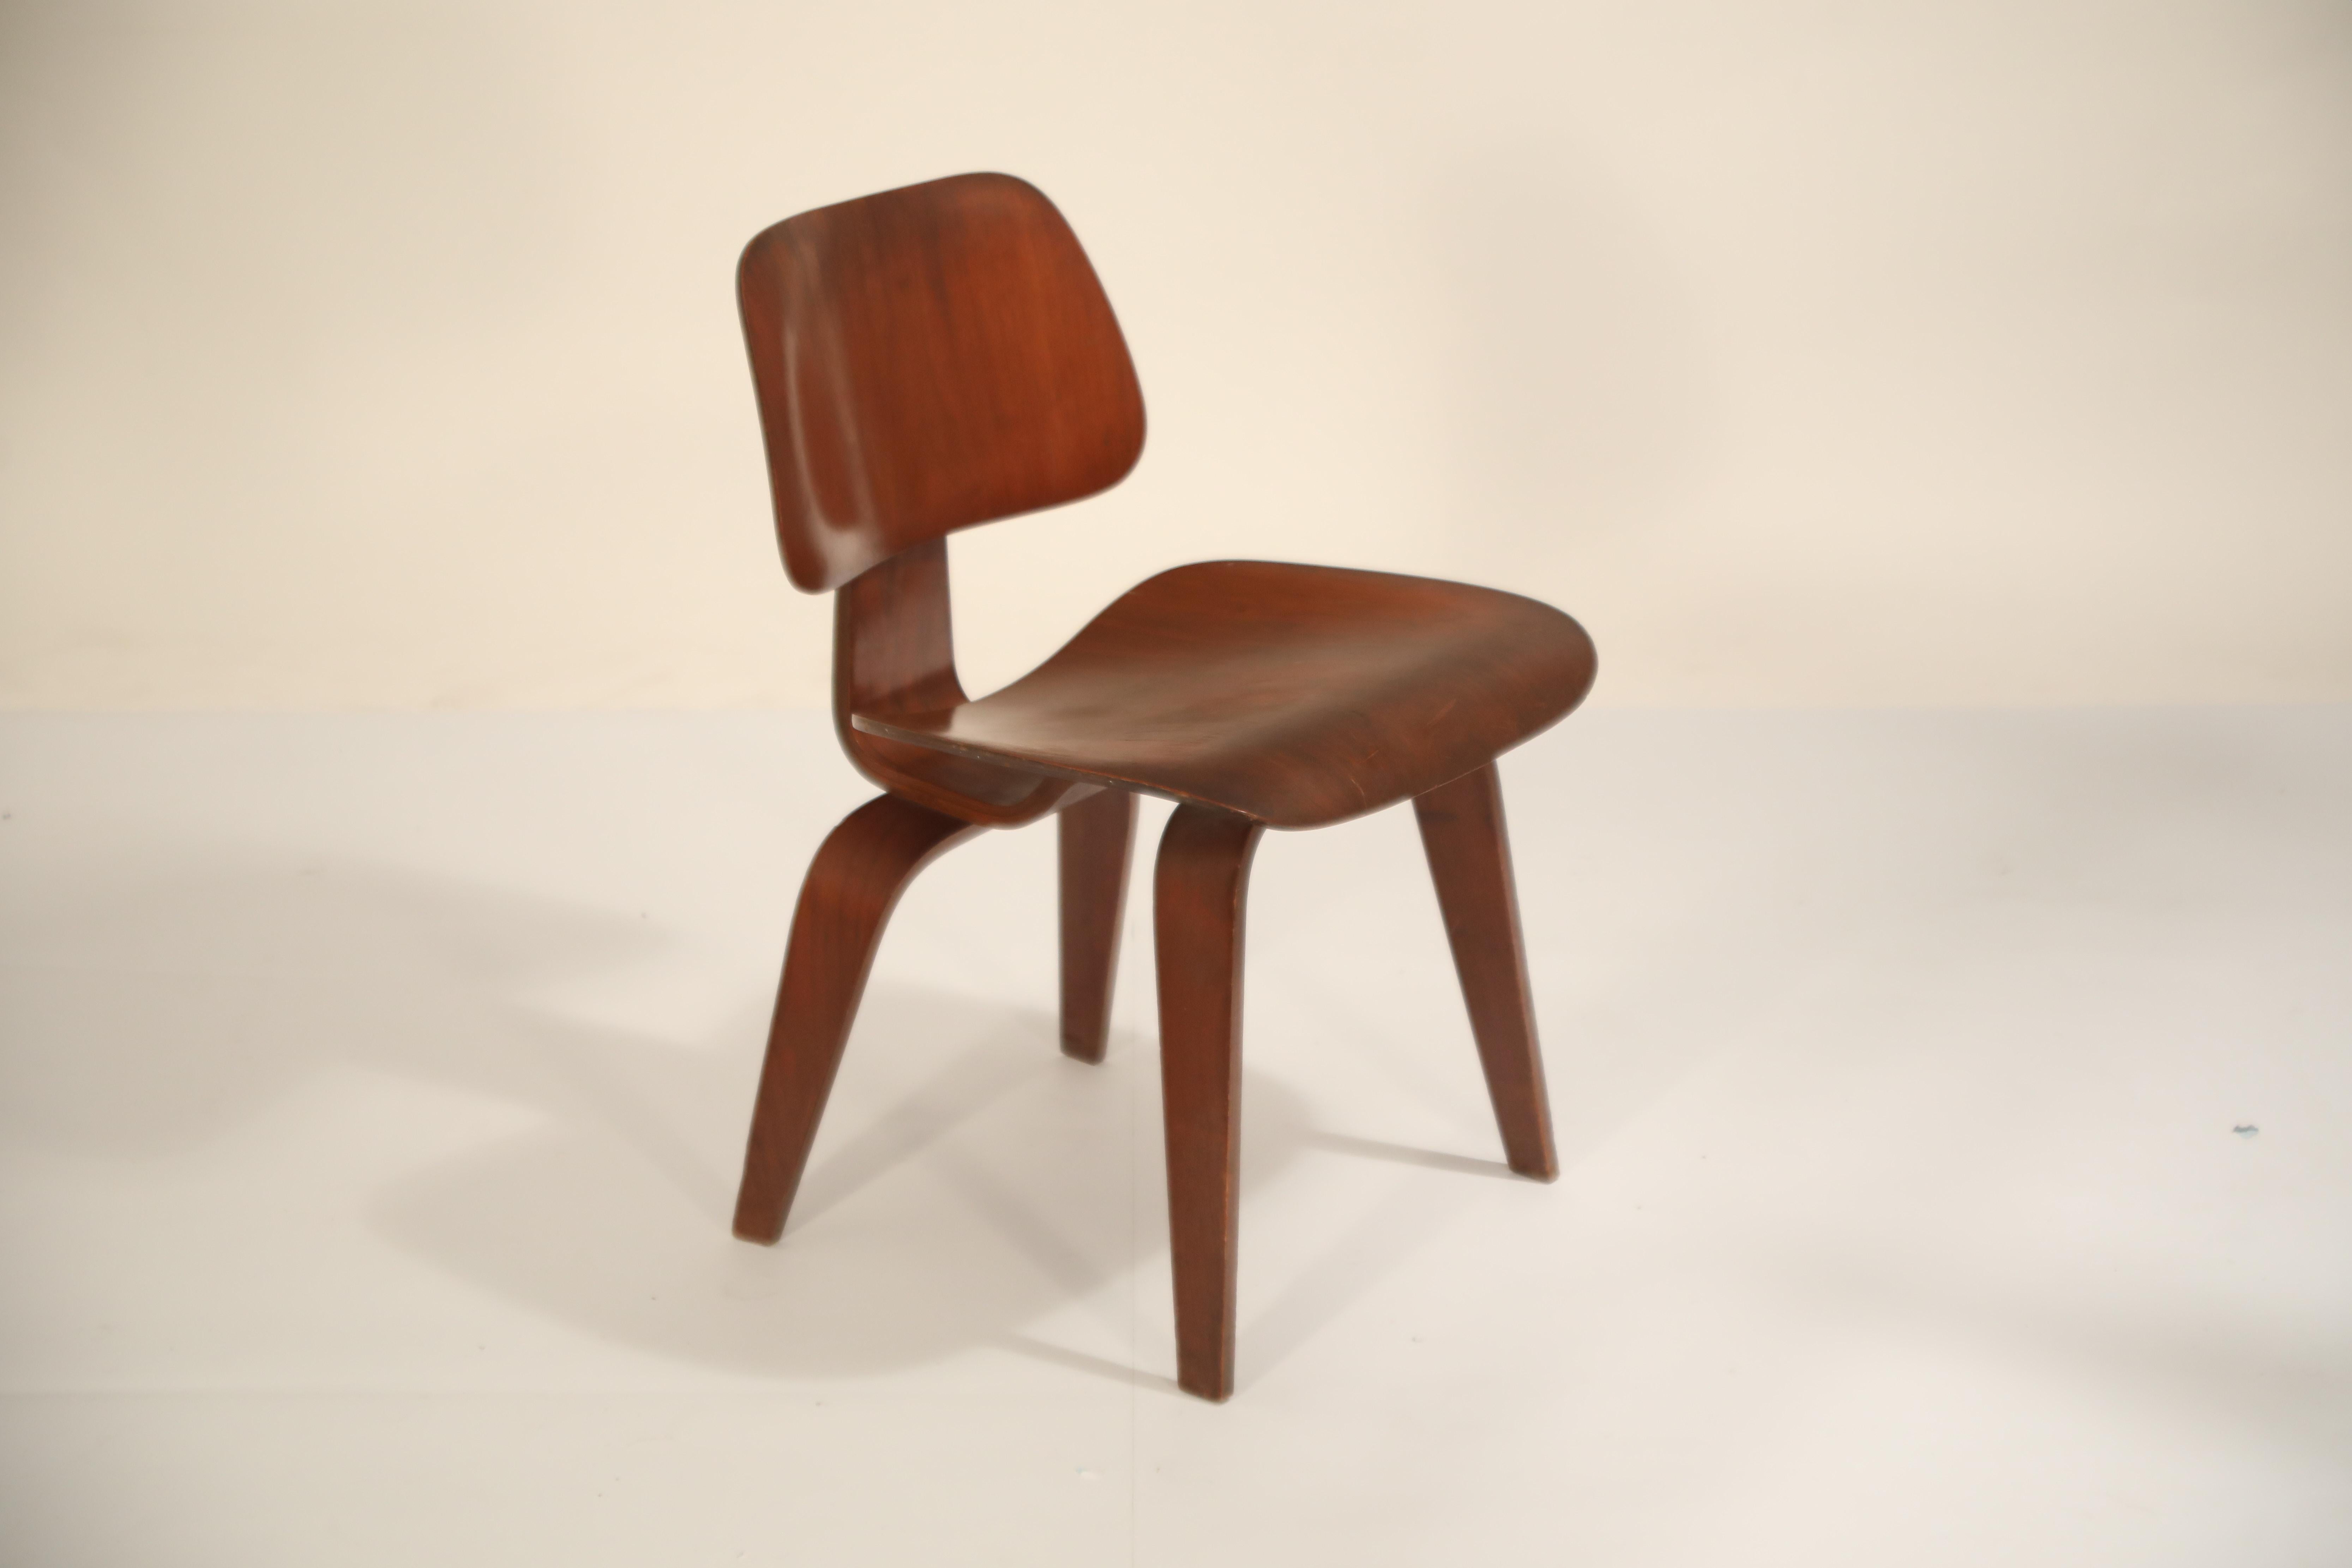 This incredible signed collector's piece is a 1st Generation DCW (Dining Chair Wood) Chair by Charles and Ray Eames, manufactured by Evans Products Company and distributed by Herman Miller. The two part label underneath the chair displays both Evans